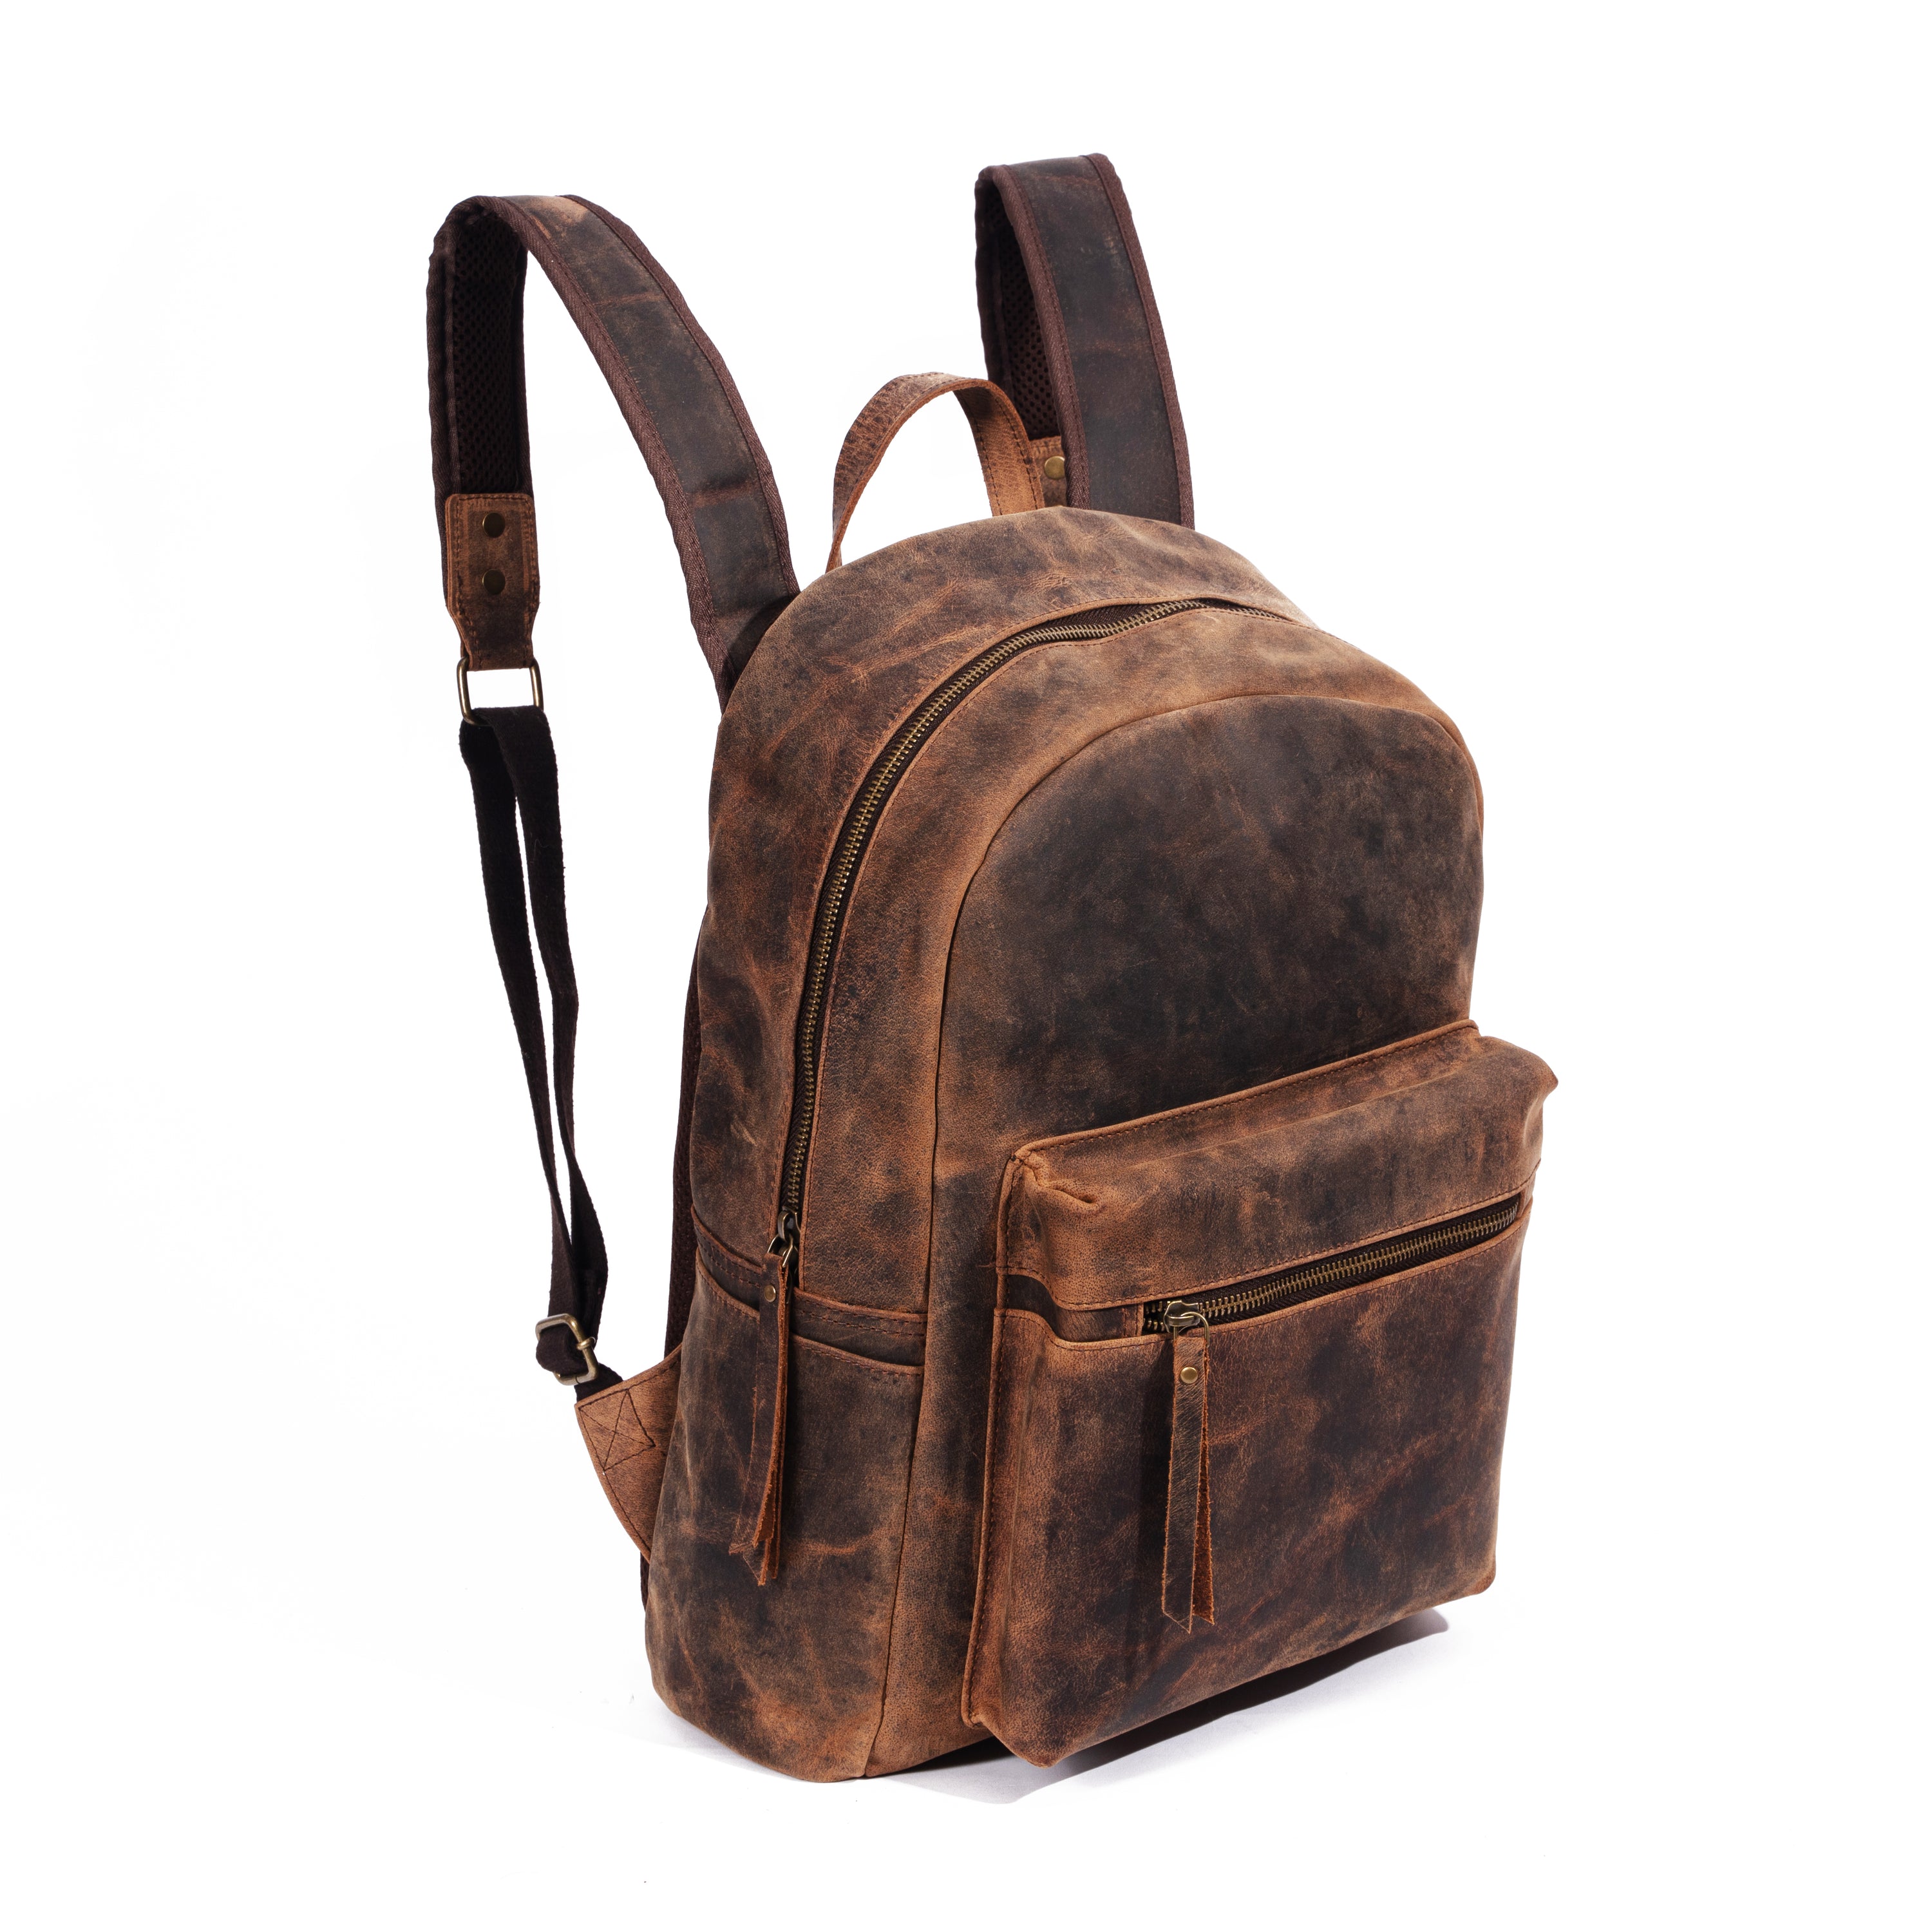 Puncho leather backpack - Cuba Libre - Leather backpack - Vintage